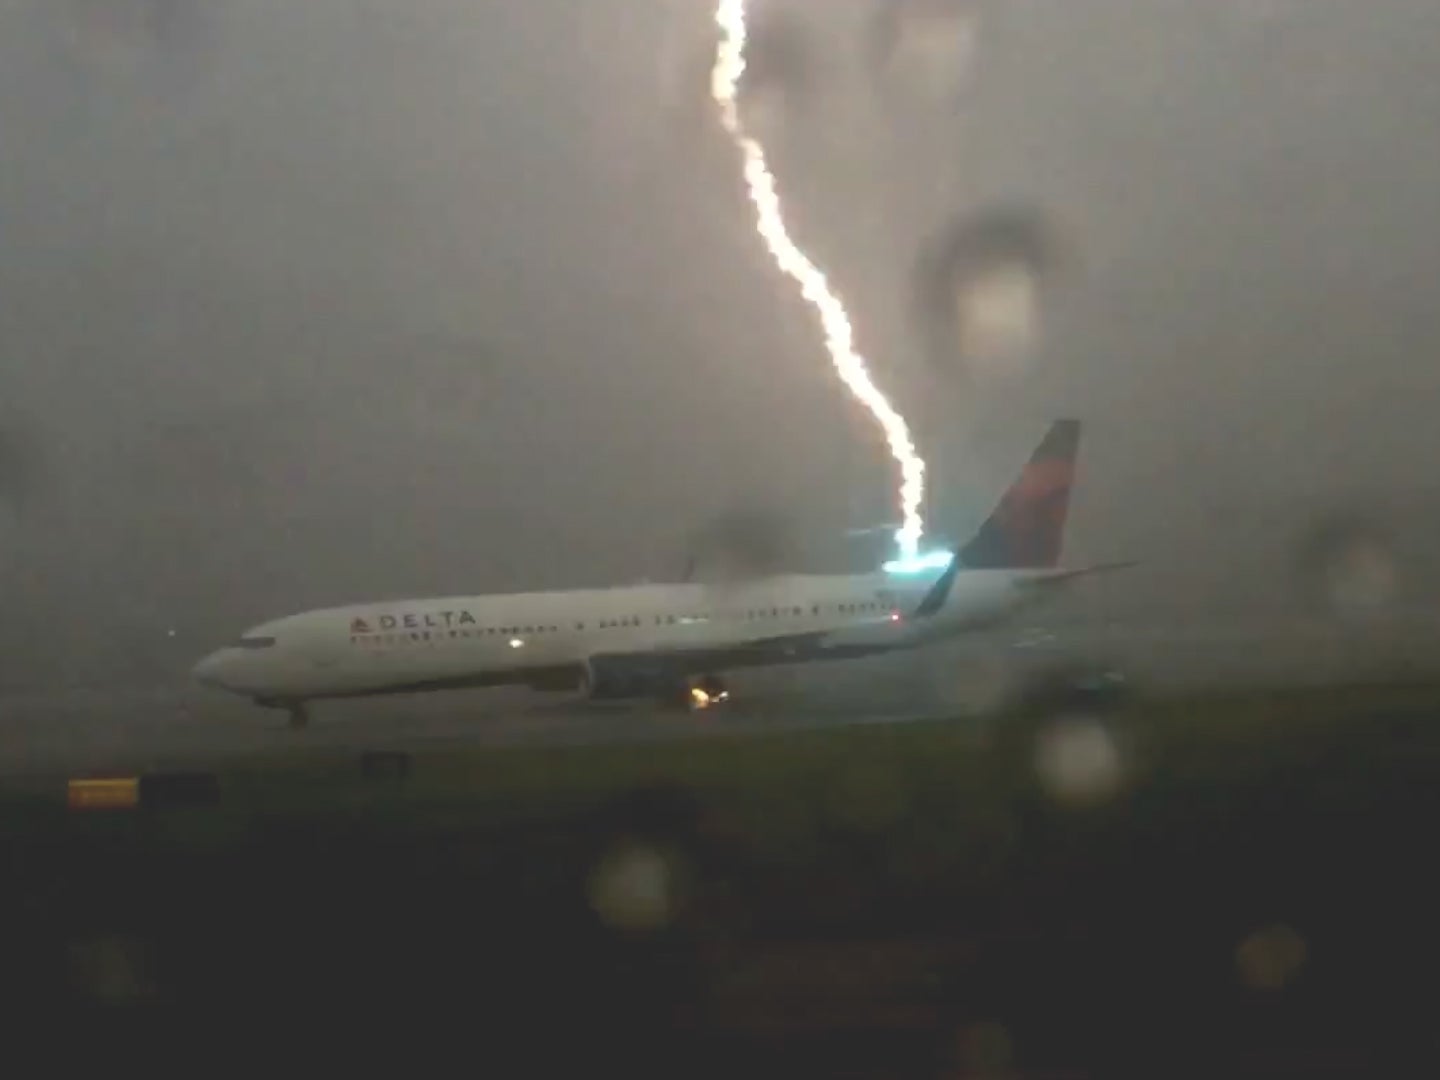 The exact moment a lightning strikes an airplane on the tarmac in Georgia